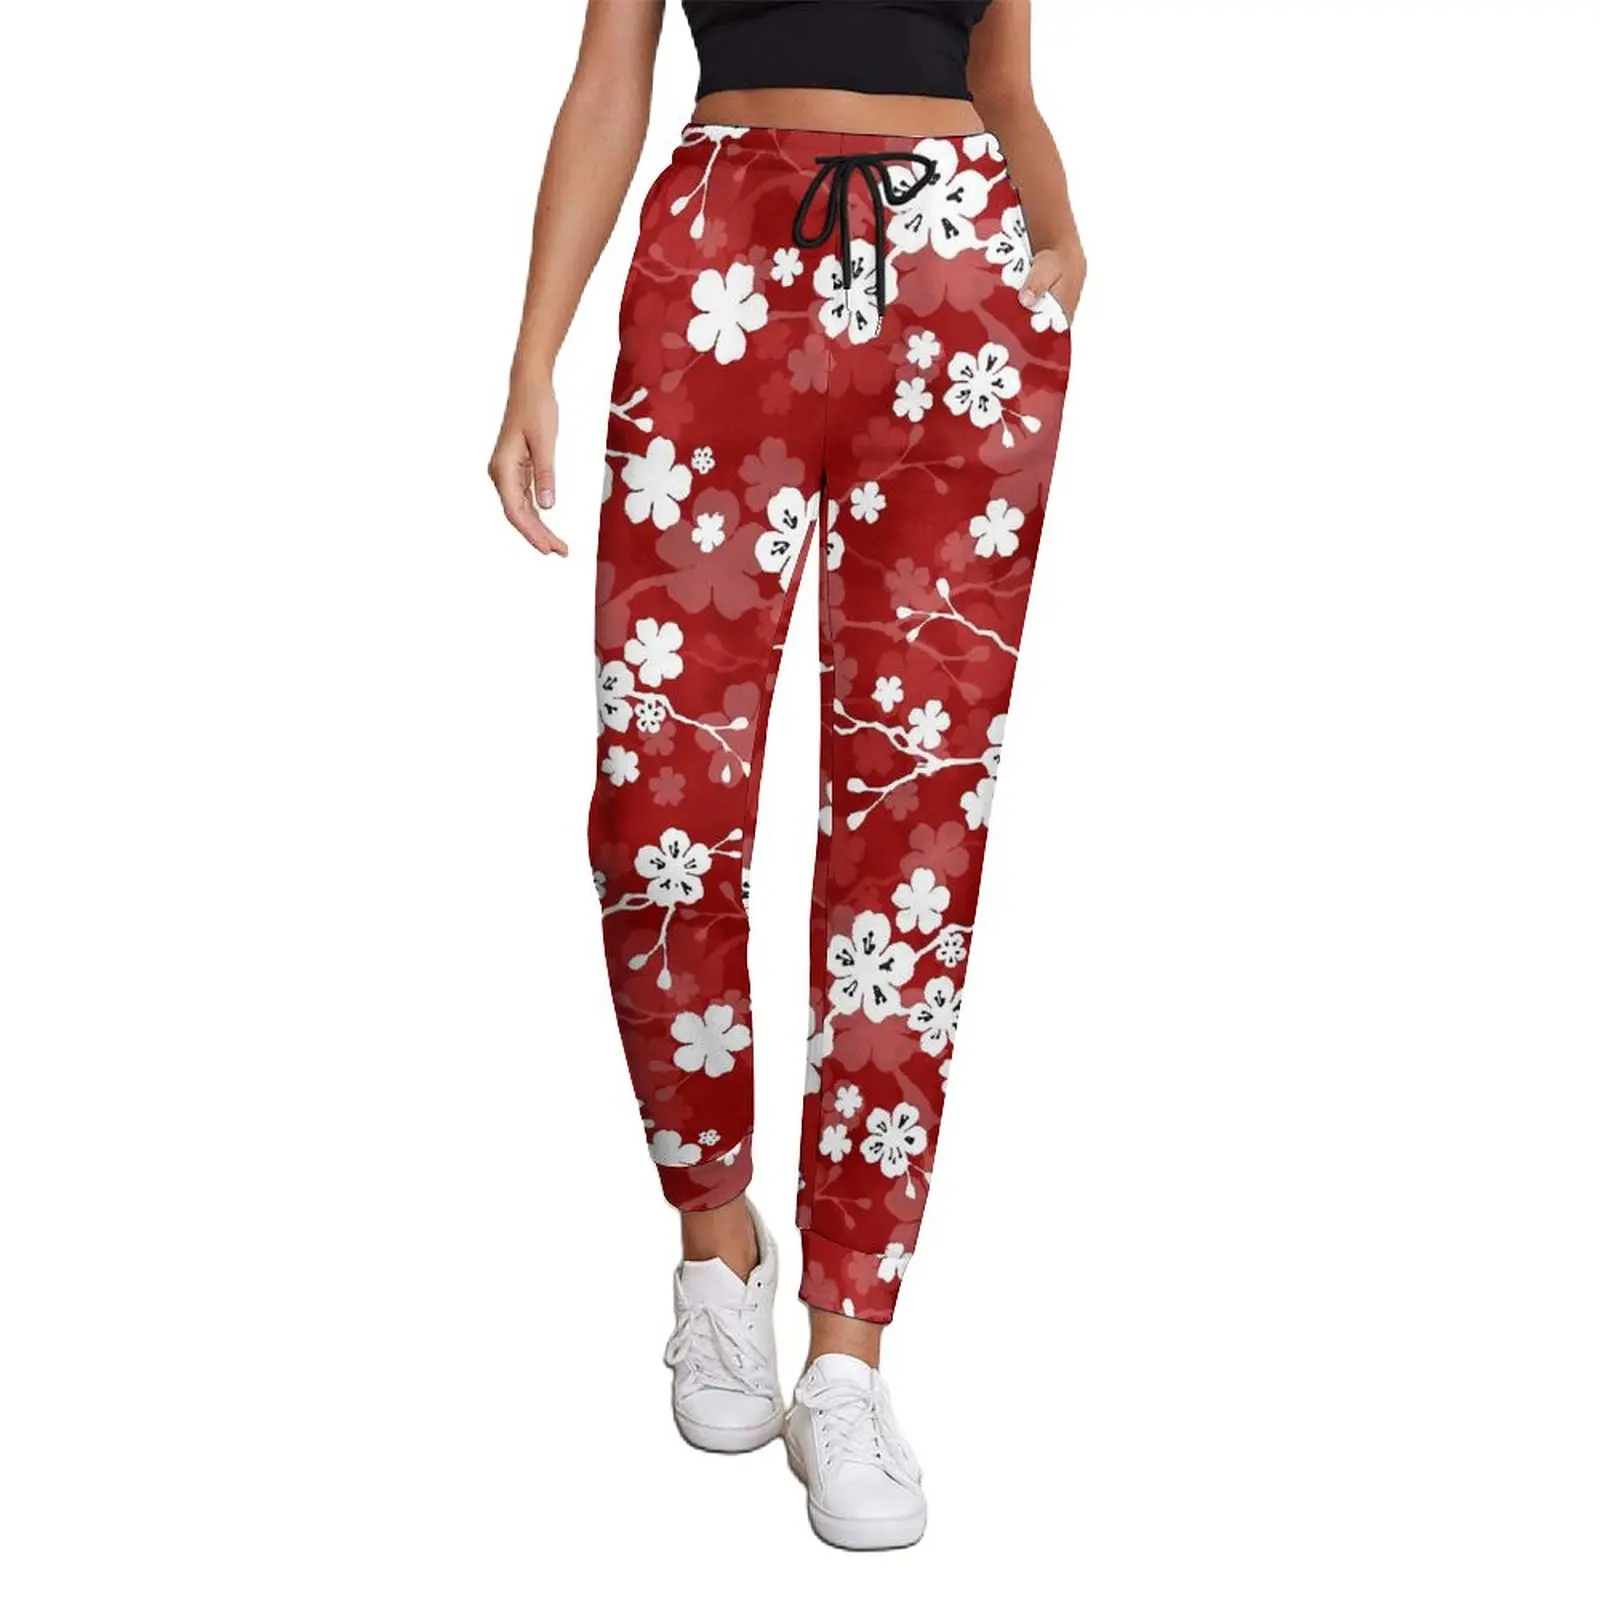 

Red And White Floral Jogger Pants Spring Cherry Blossom Trendy Sweatpants Woman Y2K Graphic Trousers Big Size